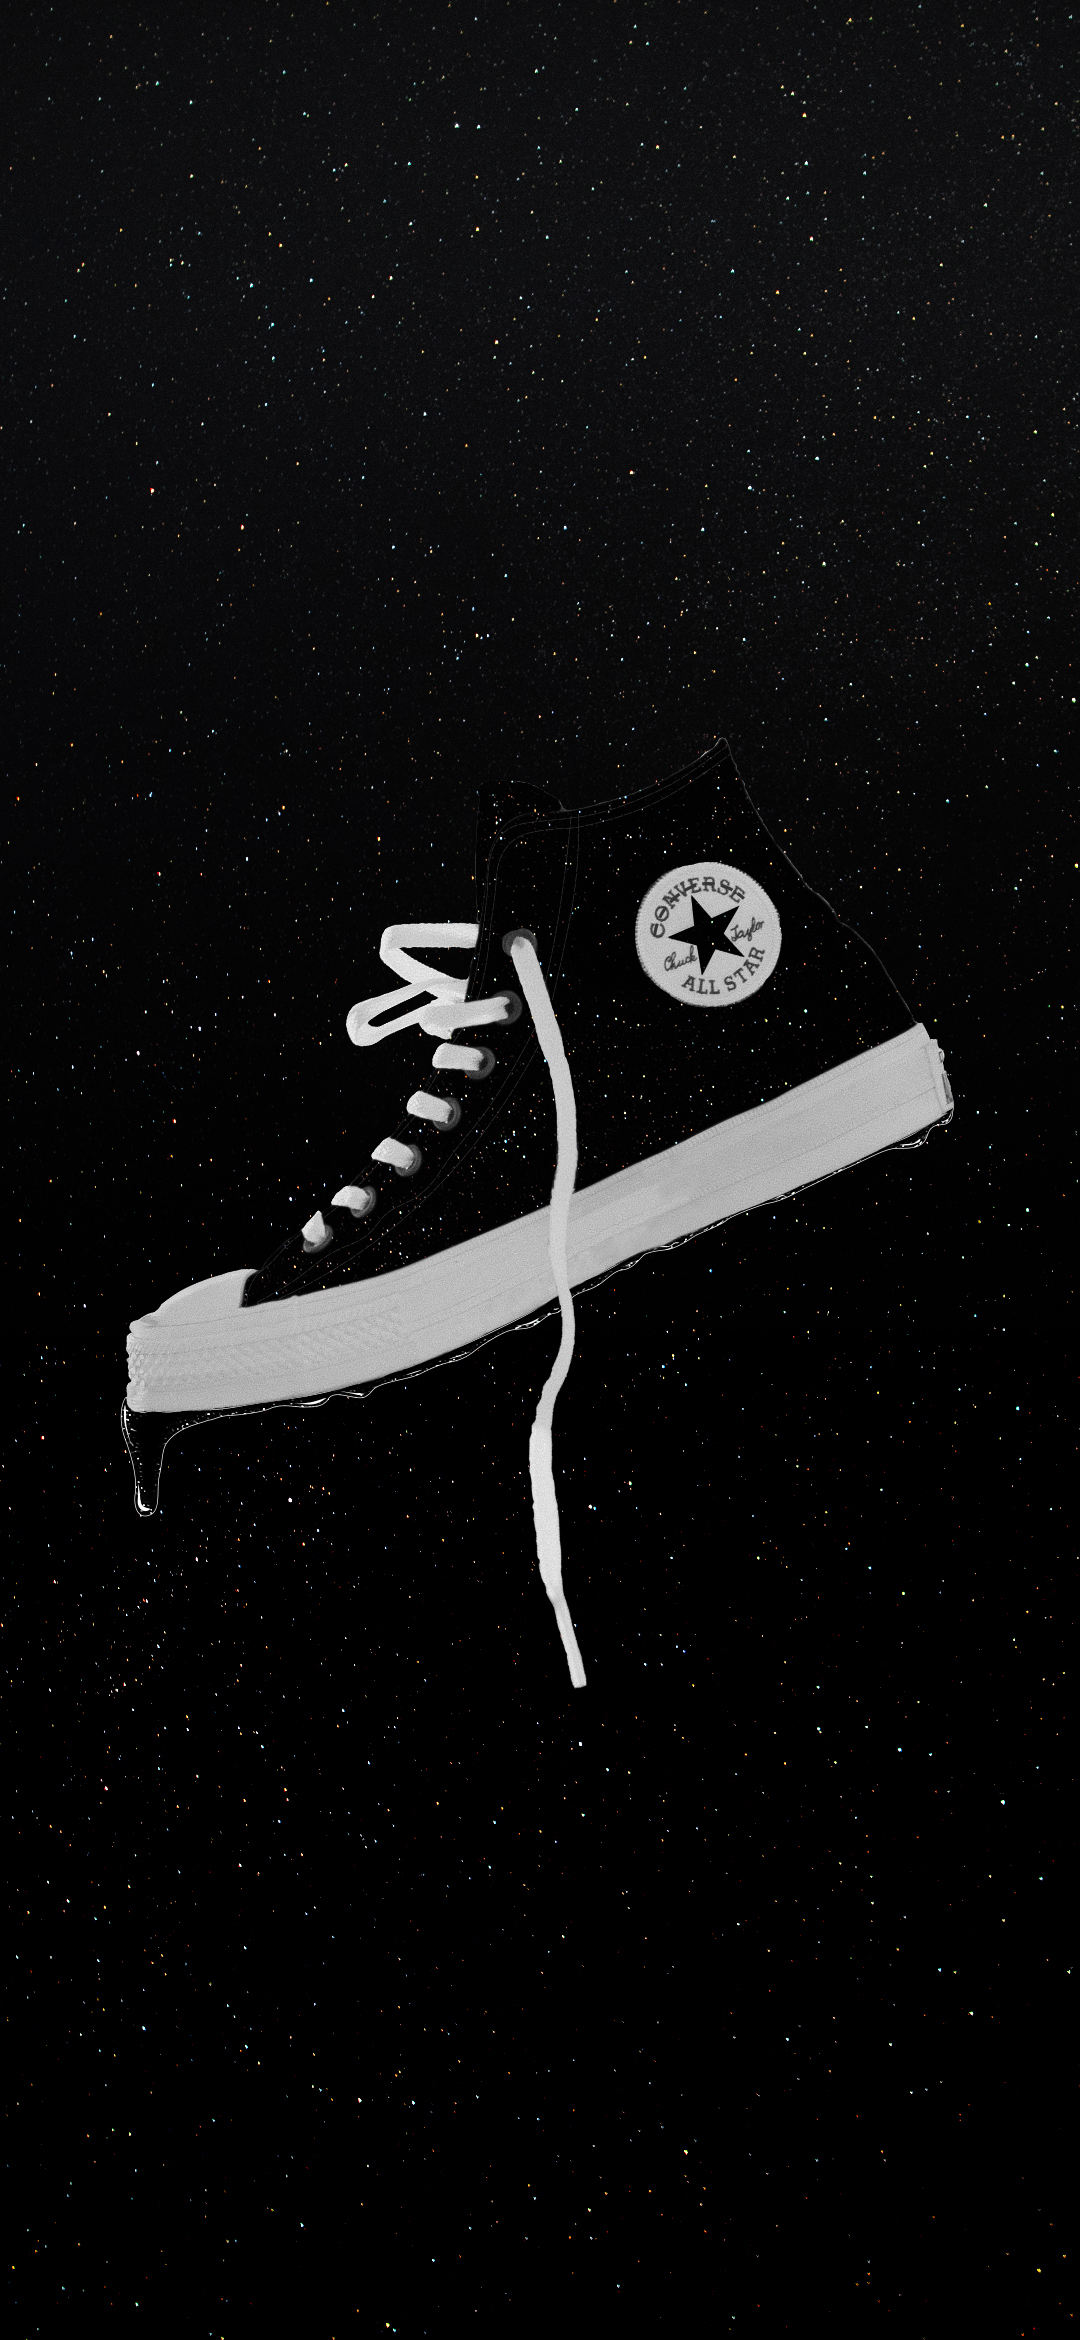 android products, converse, shoe, stars